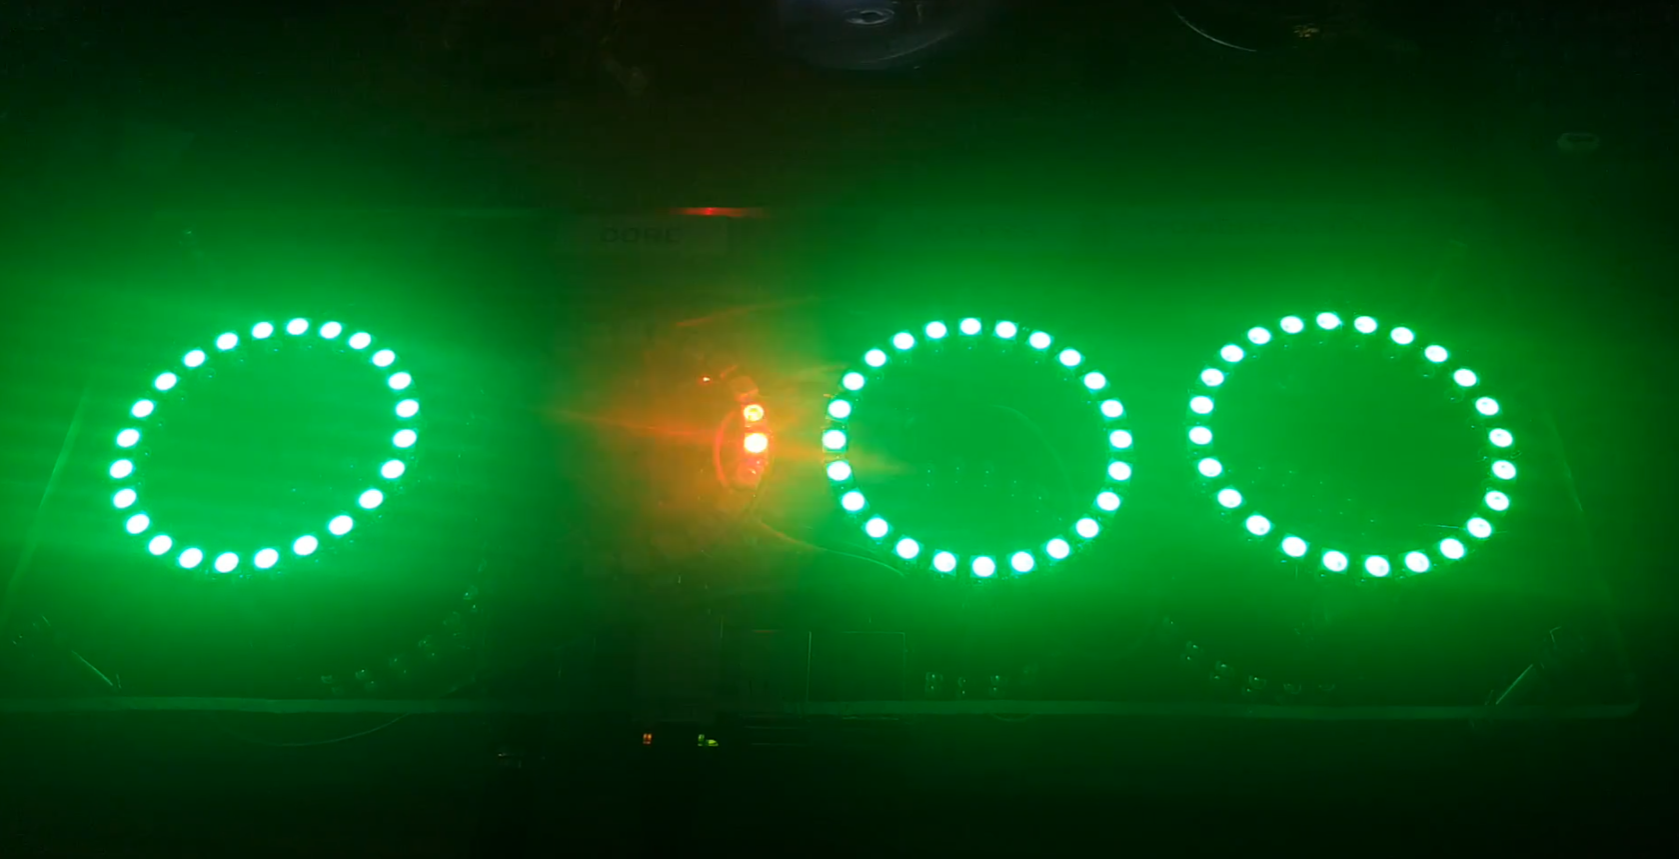 Four 24 rgb led rings, three all green and one with two red leds lit.